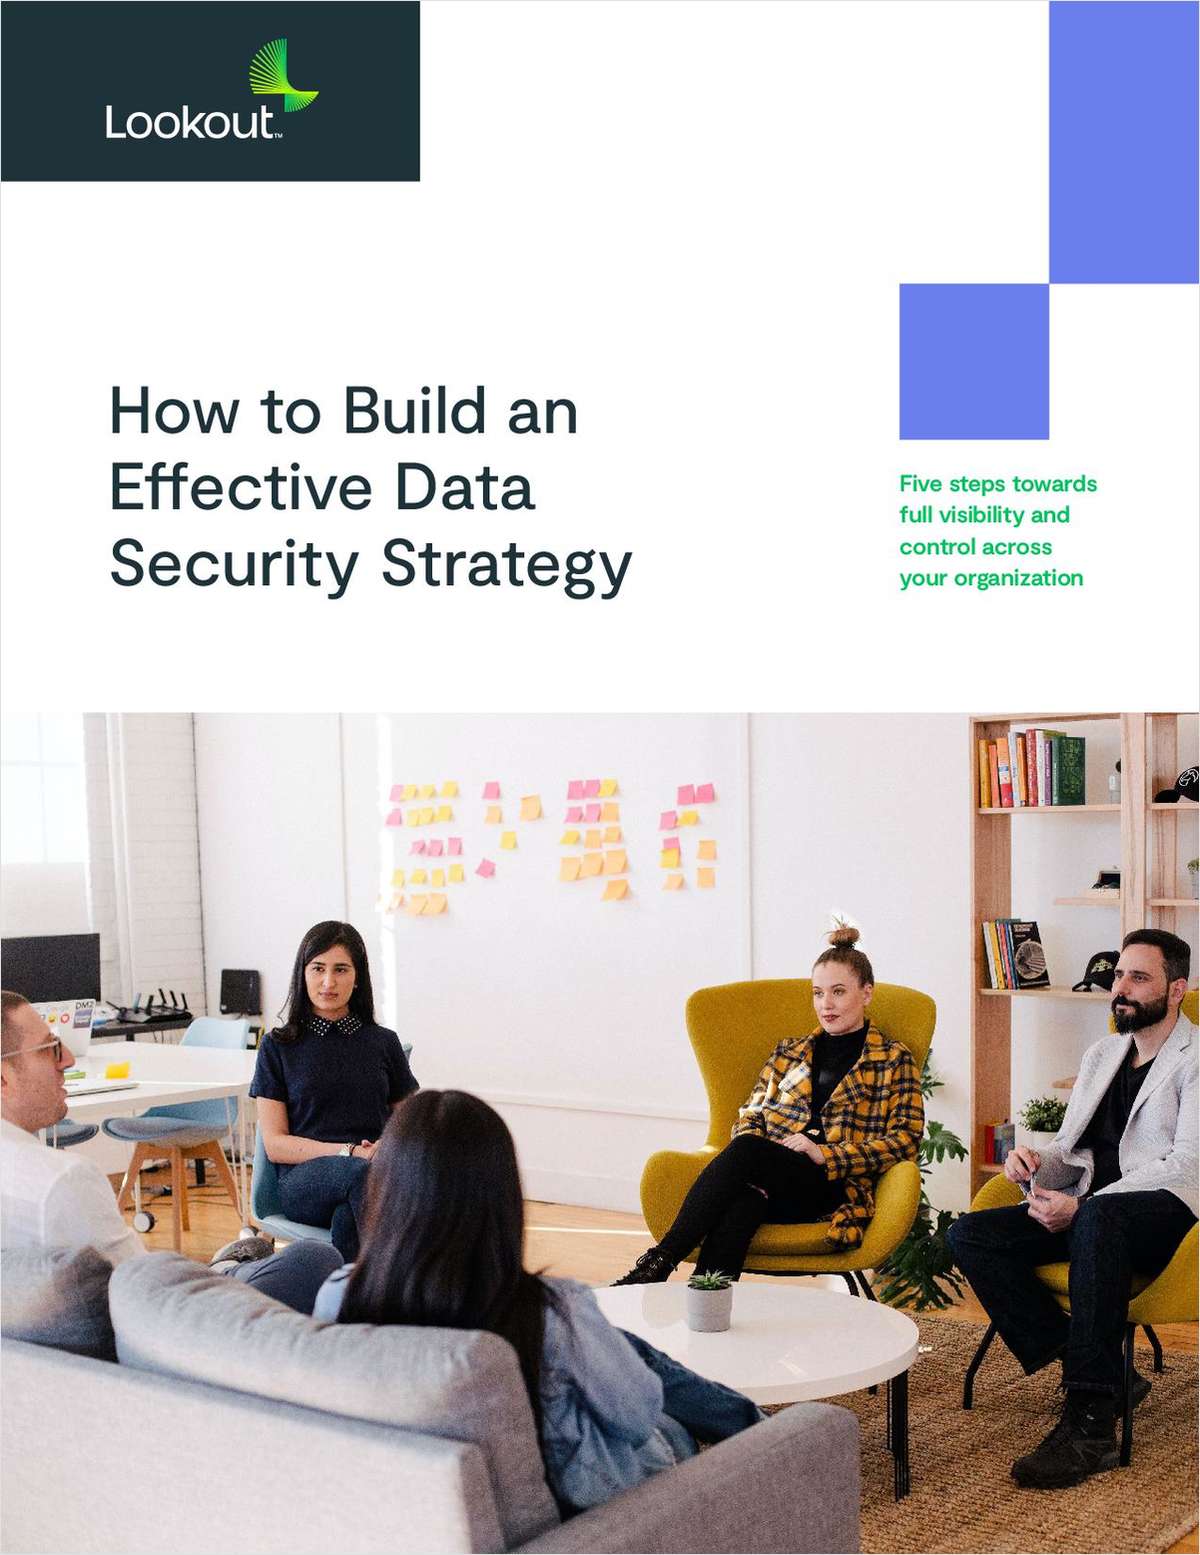 How to Build an Effective Data Security Strategy